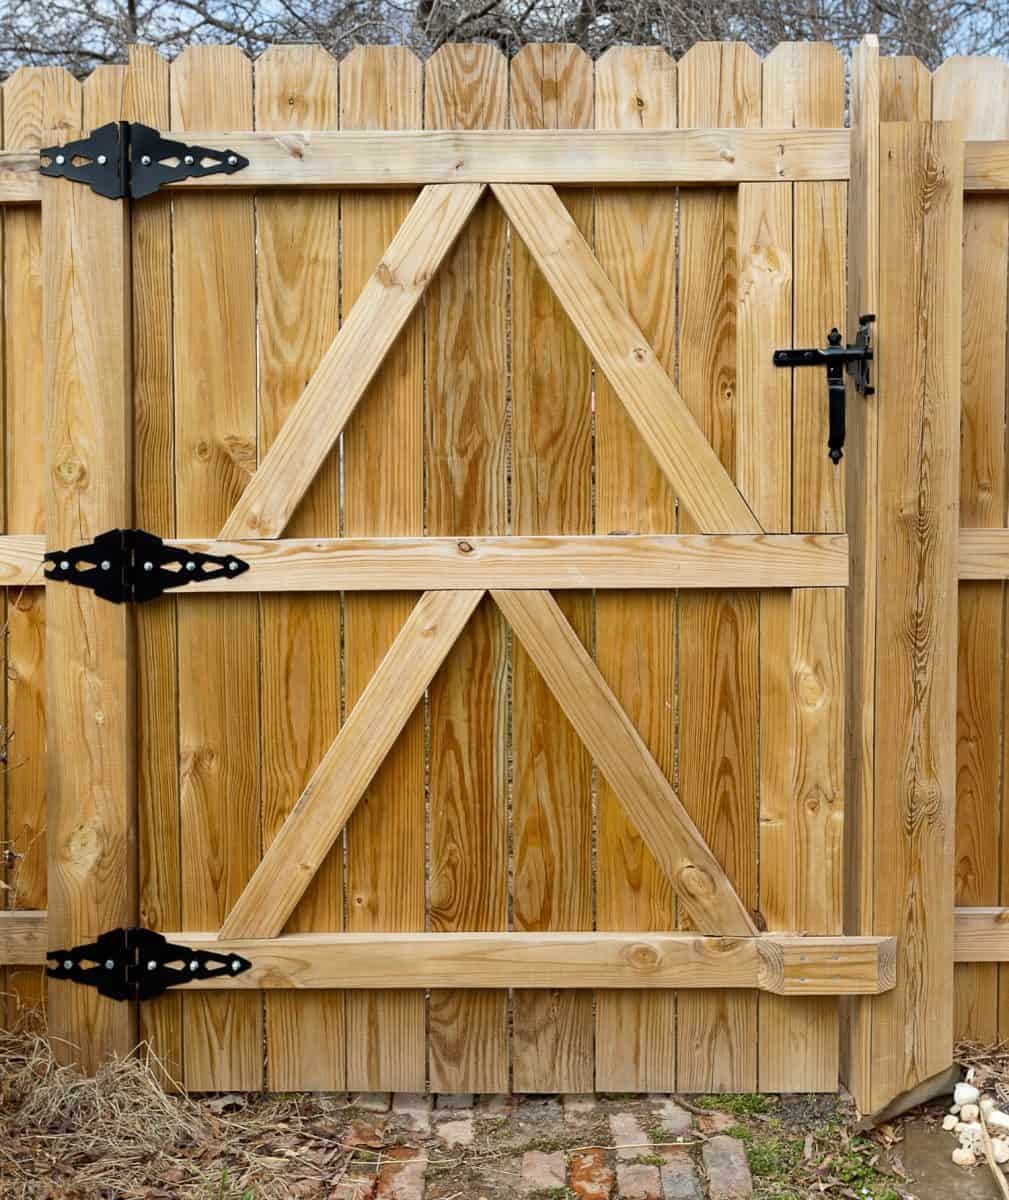 Newly built residential backyard wooden gate with hinges. 